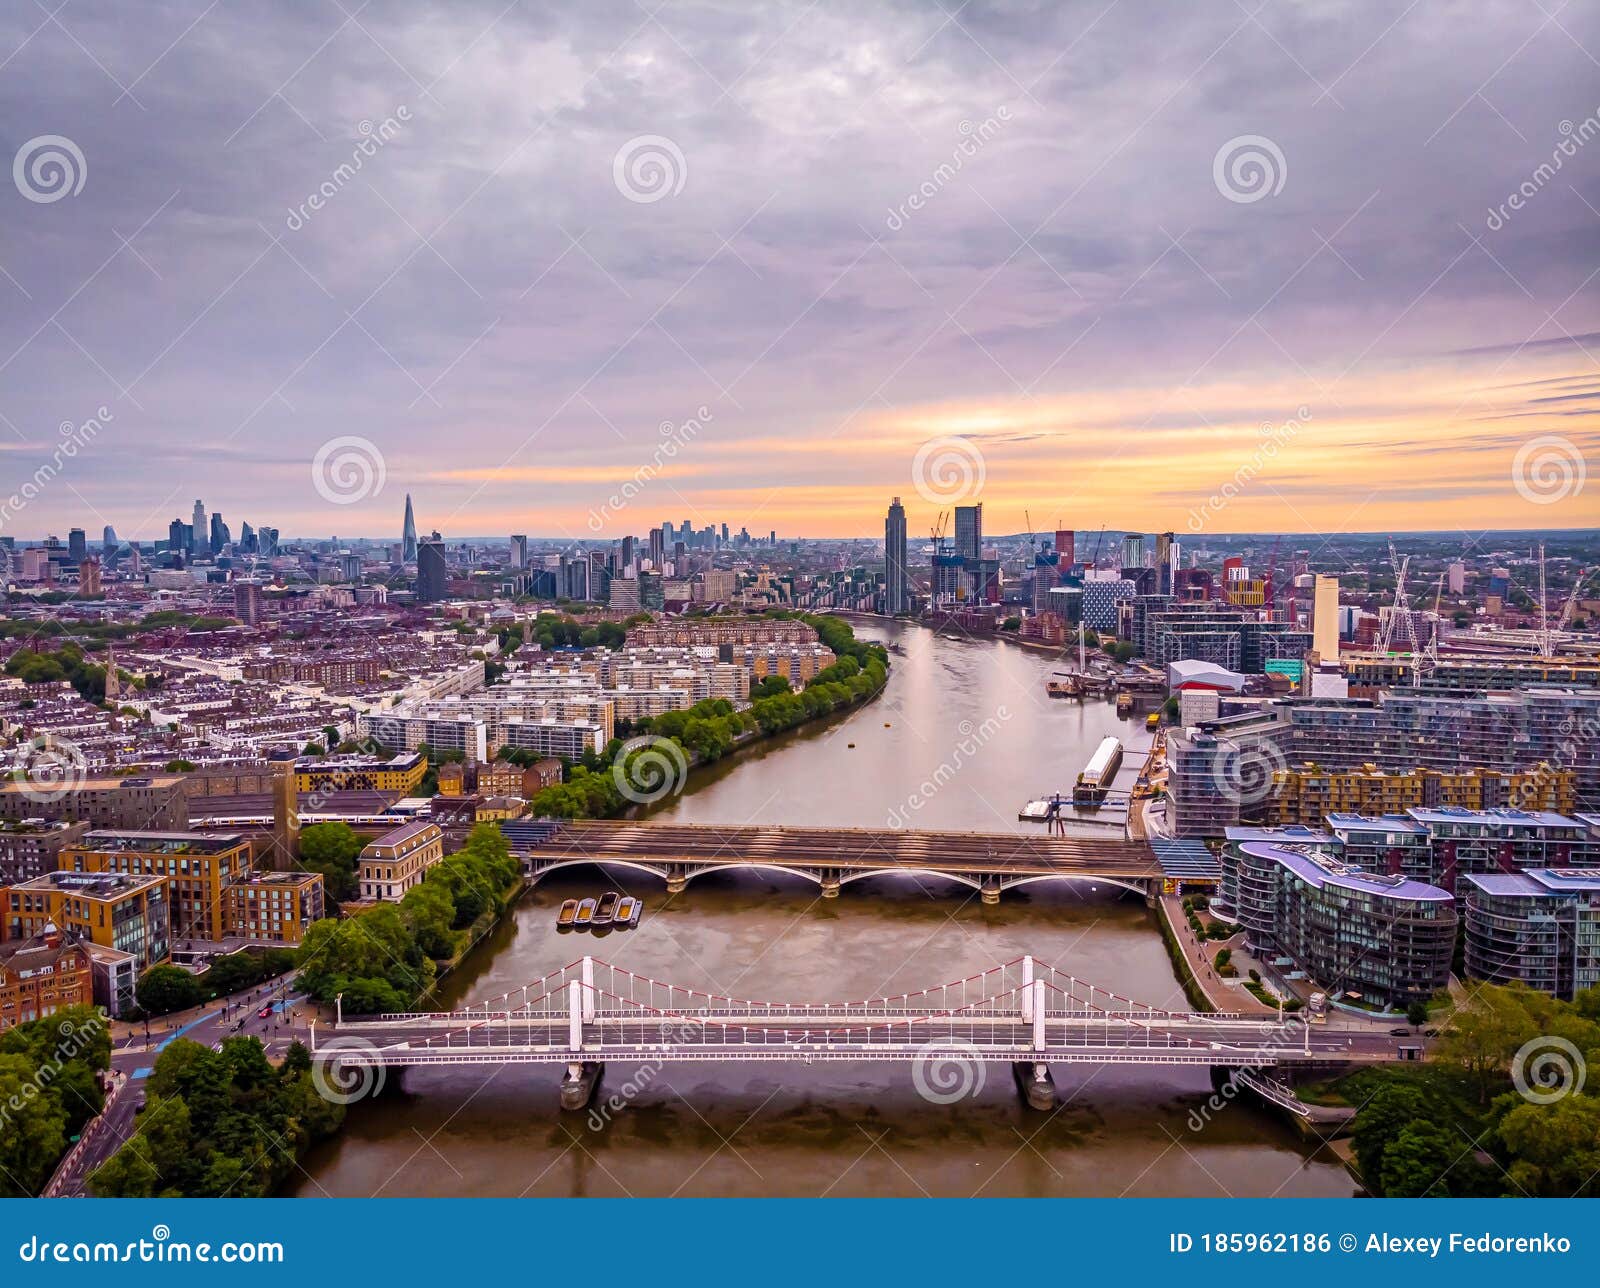 aerial view of chelsea bridge and central london, uk